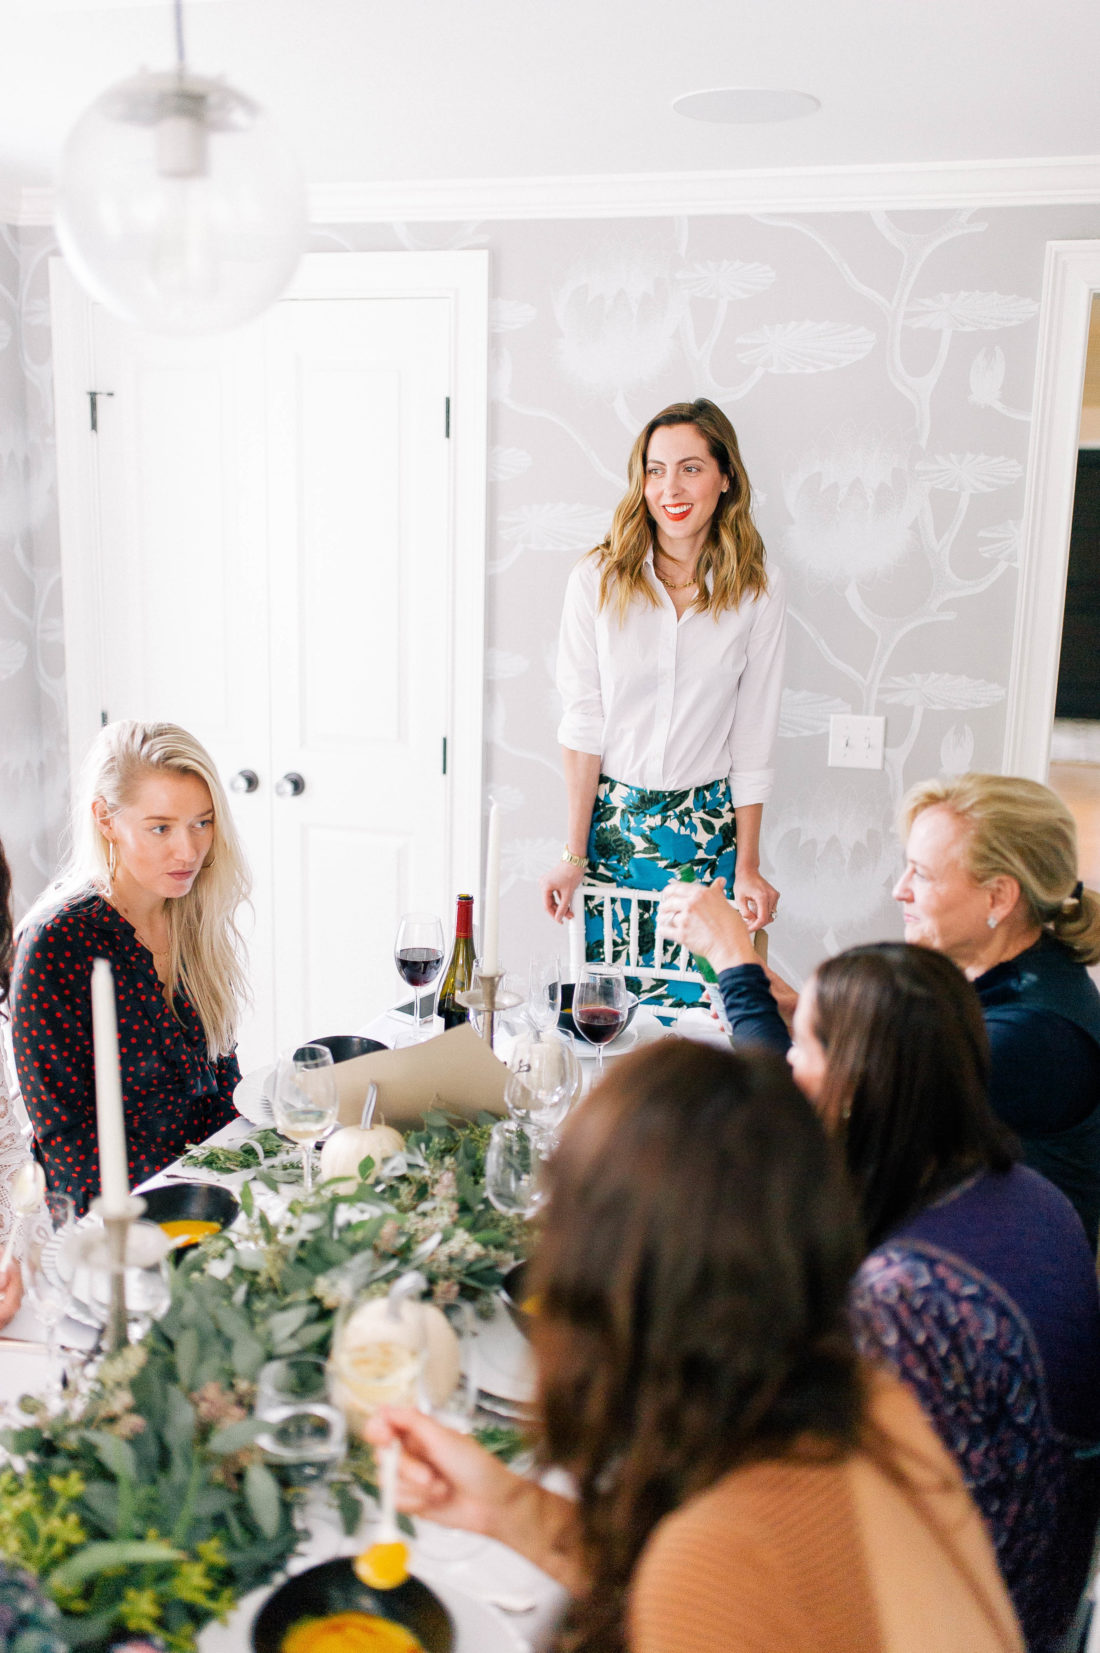 Eva Amurri Martino speaks about No Kid Hungry at her Friendsgiving in Connecticut